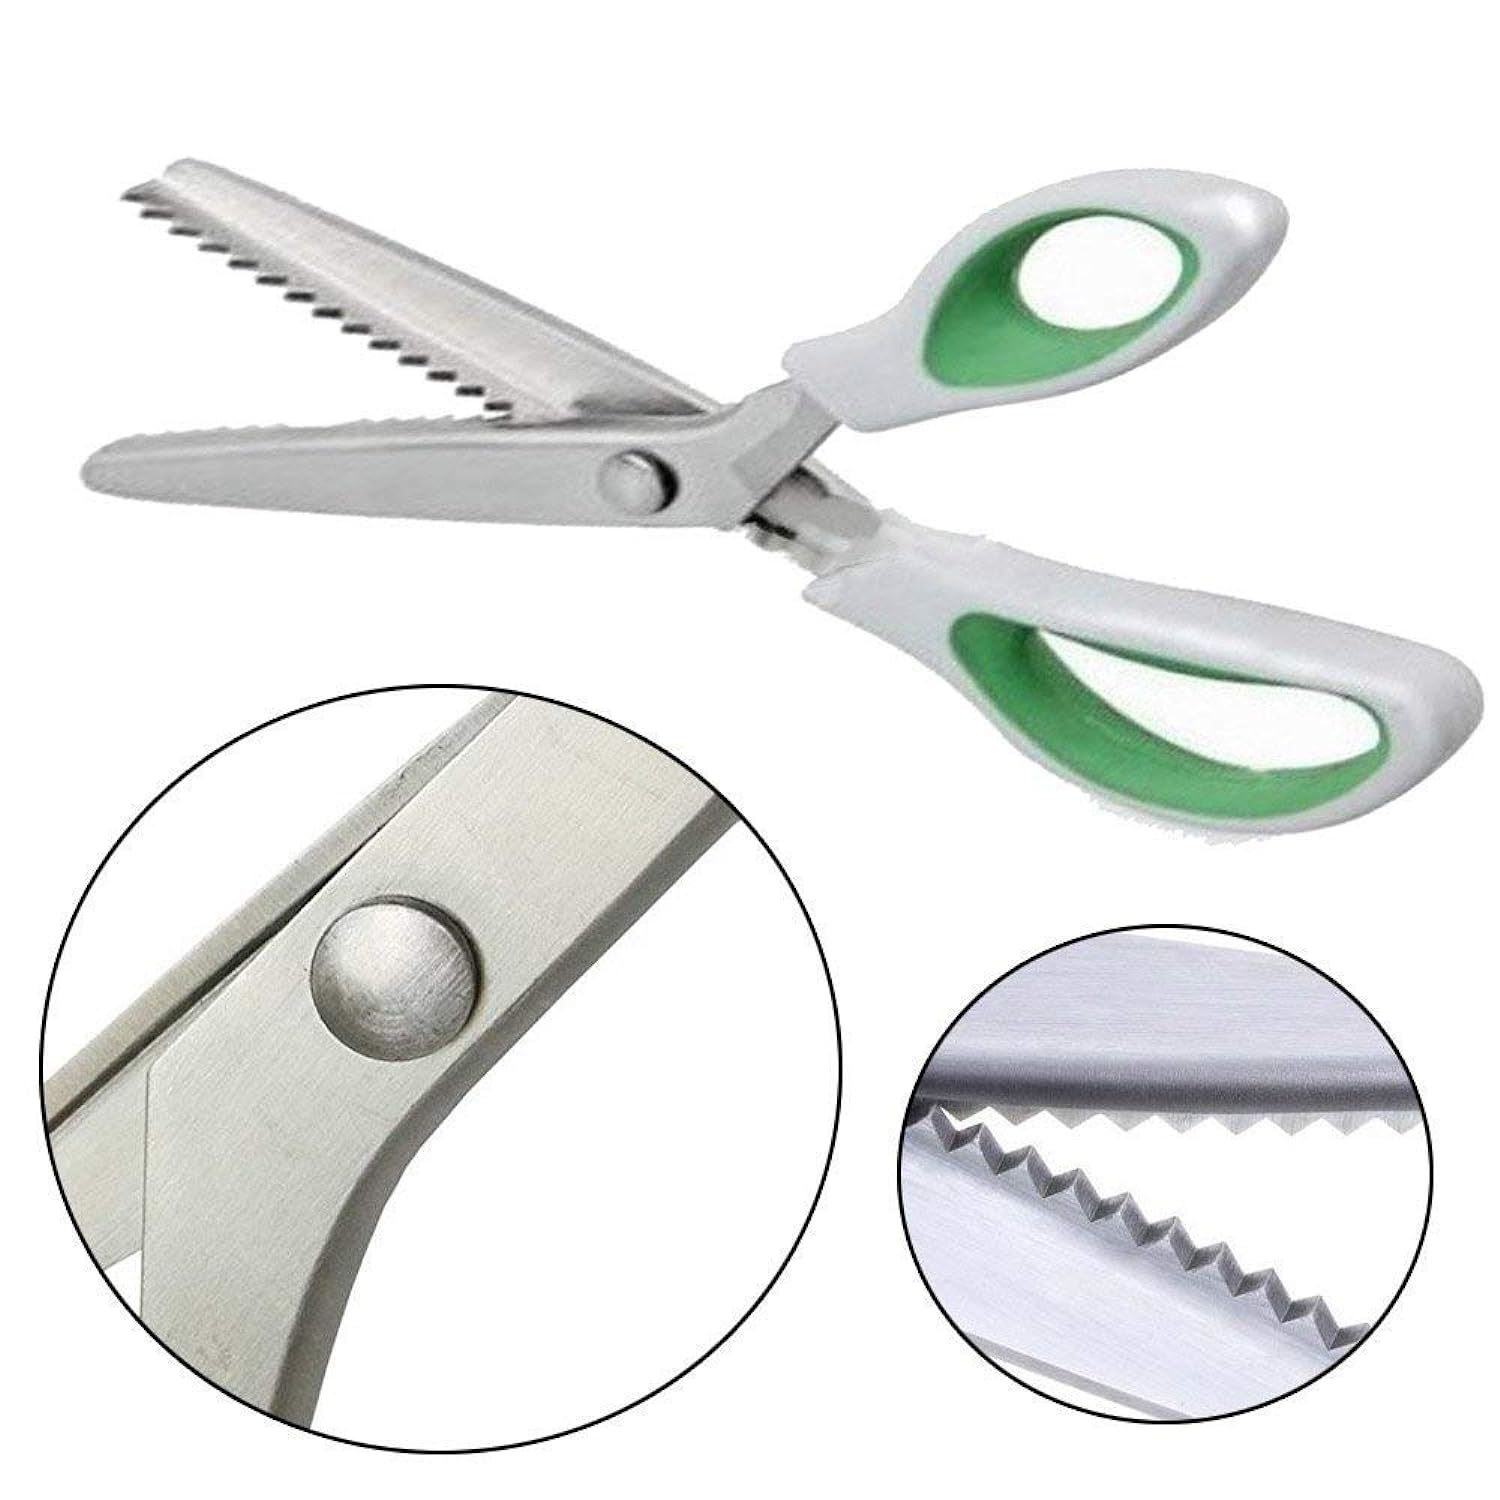 Pinking Shears Scissors for Fabric Paper Cutting, 9 Stainless